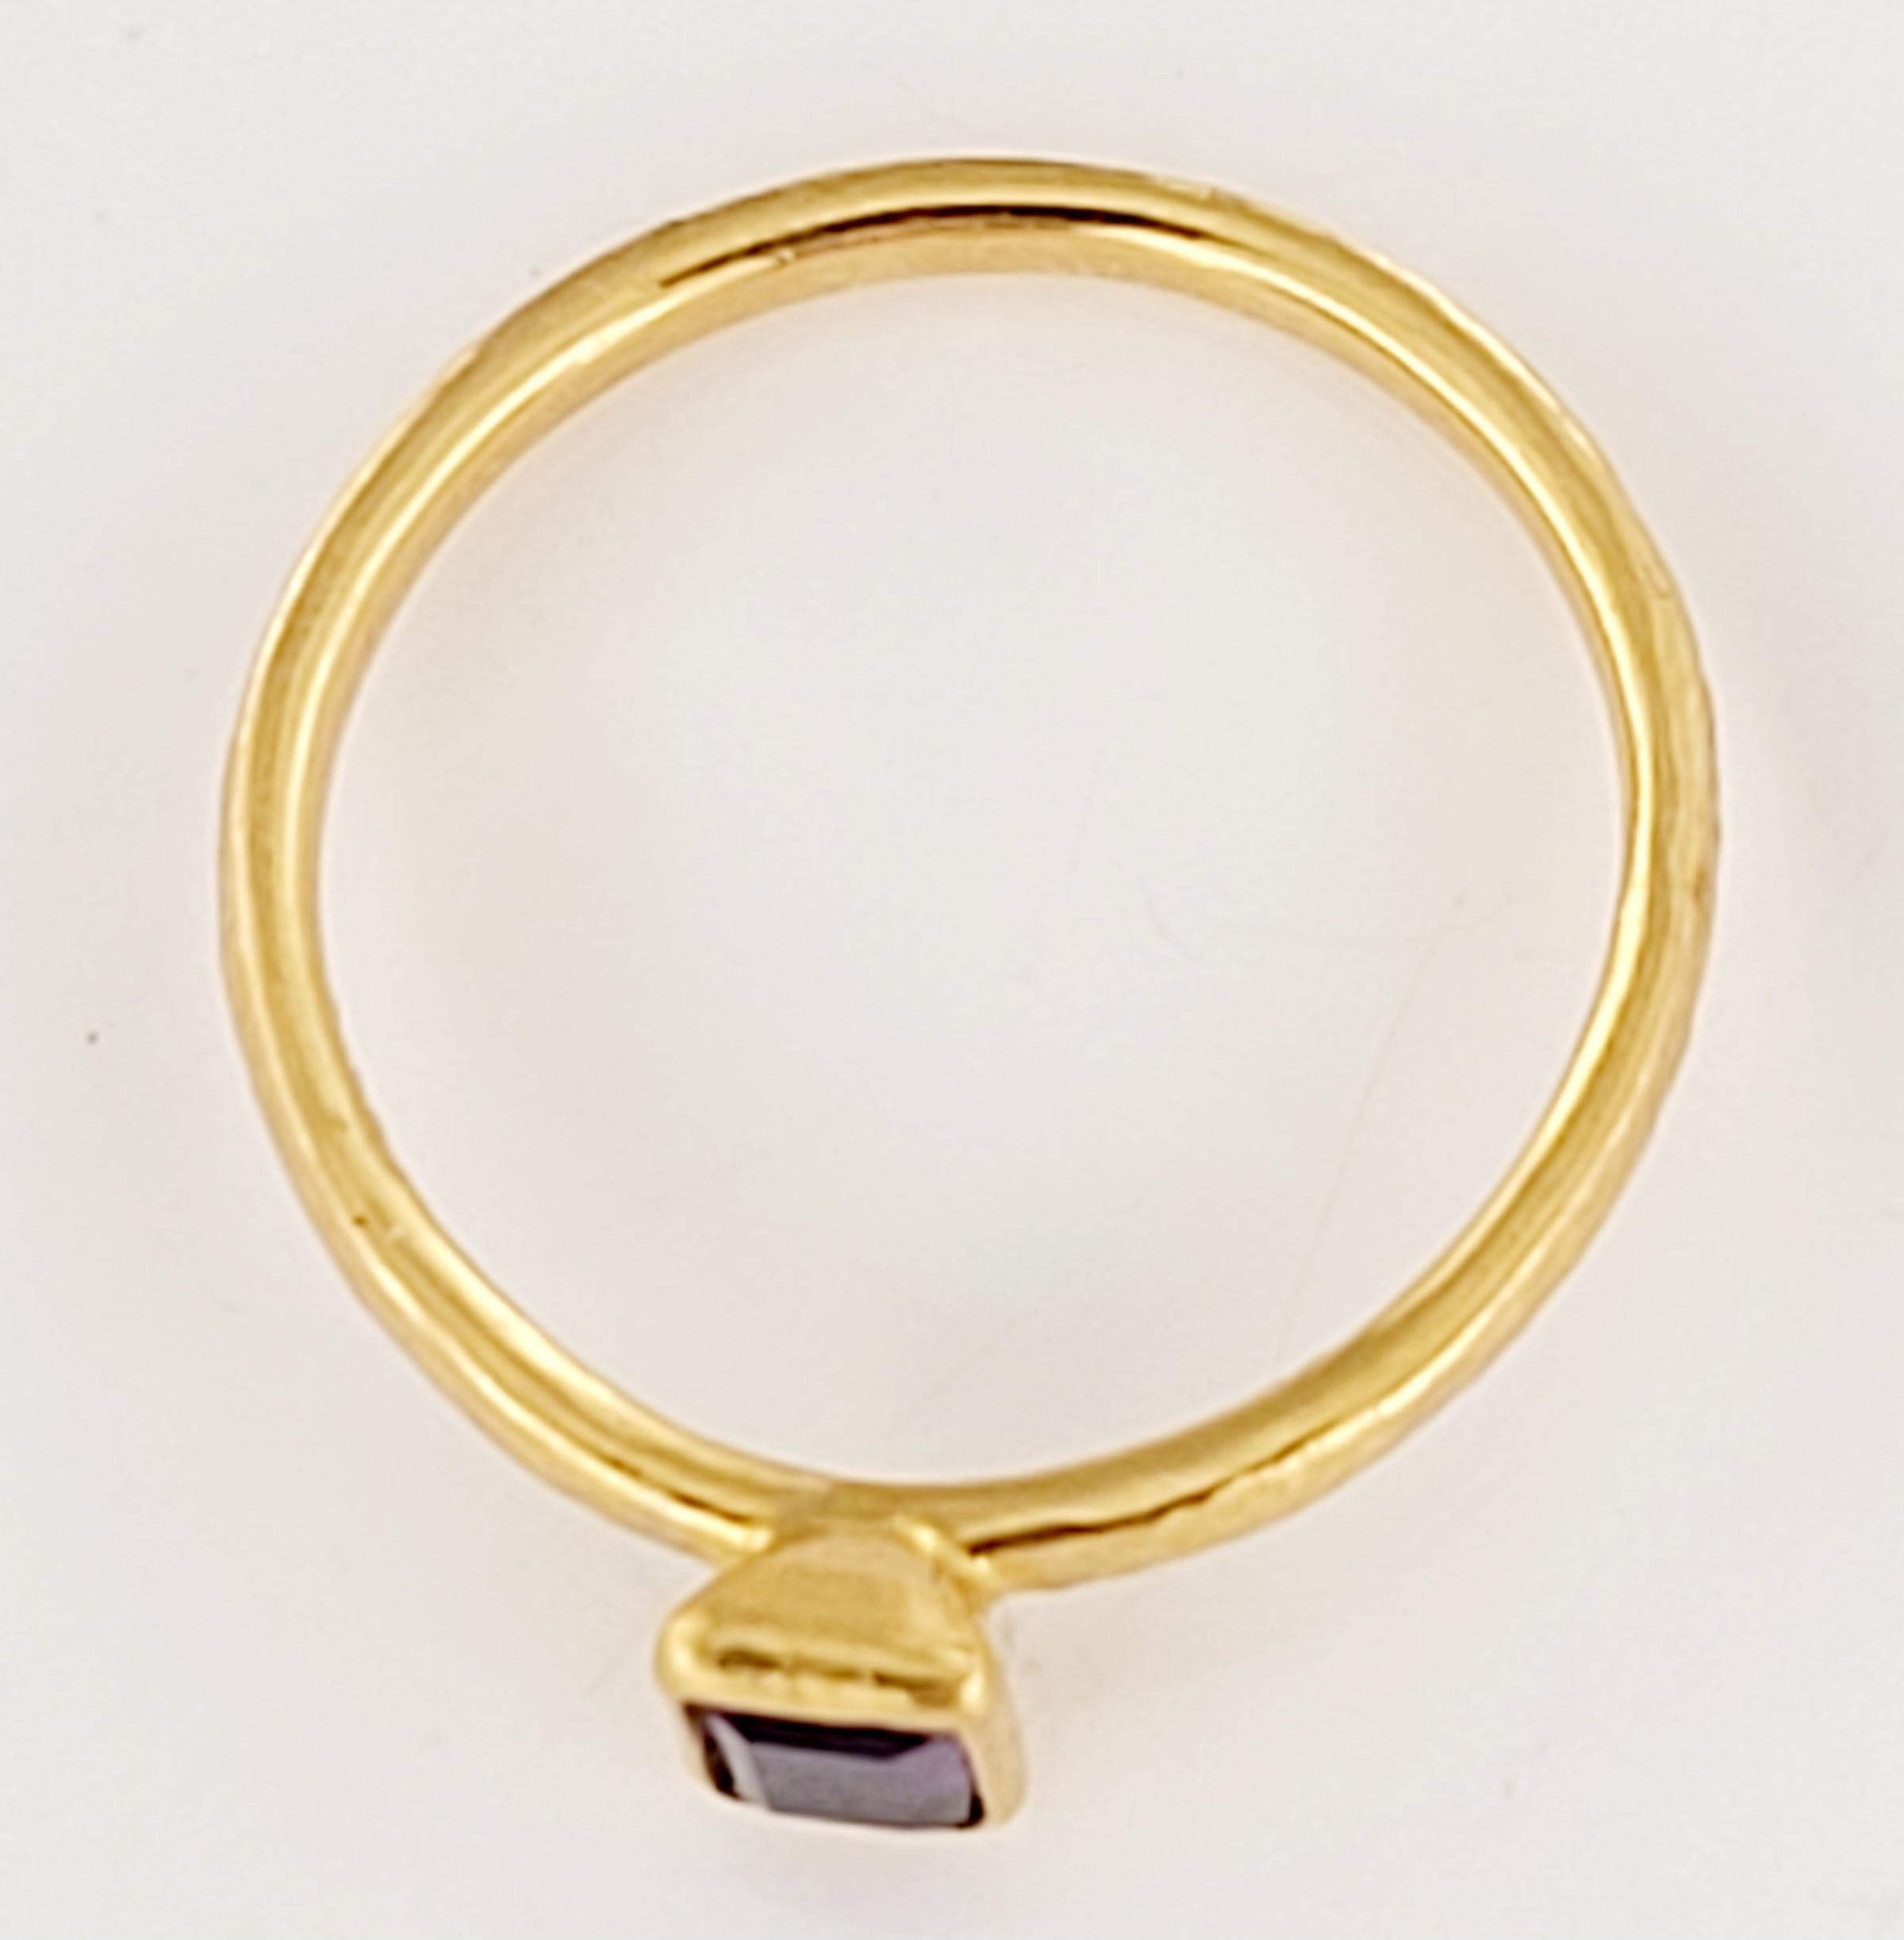 Women's Designed by famous Gurhan, Amethyst Ring Set in 24K Yellow Gold Size 6.25 For Sale